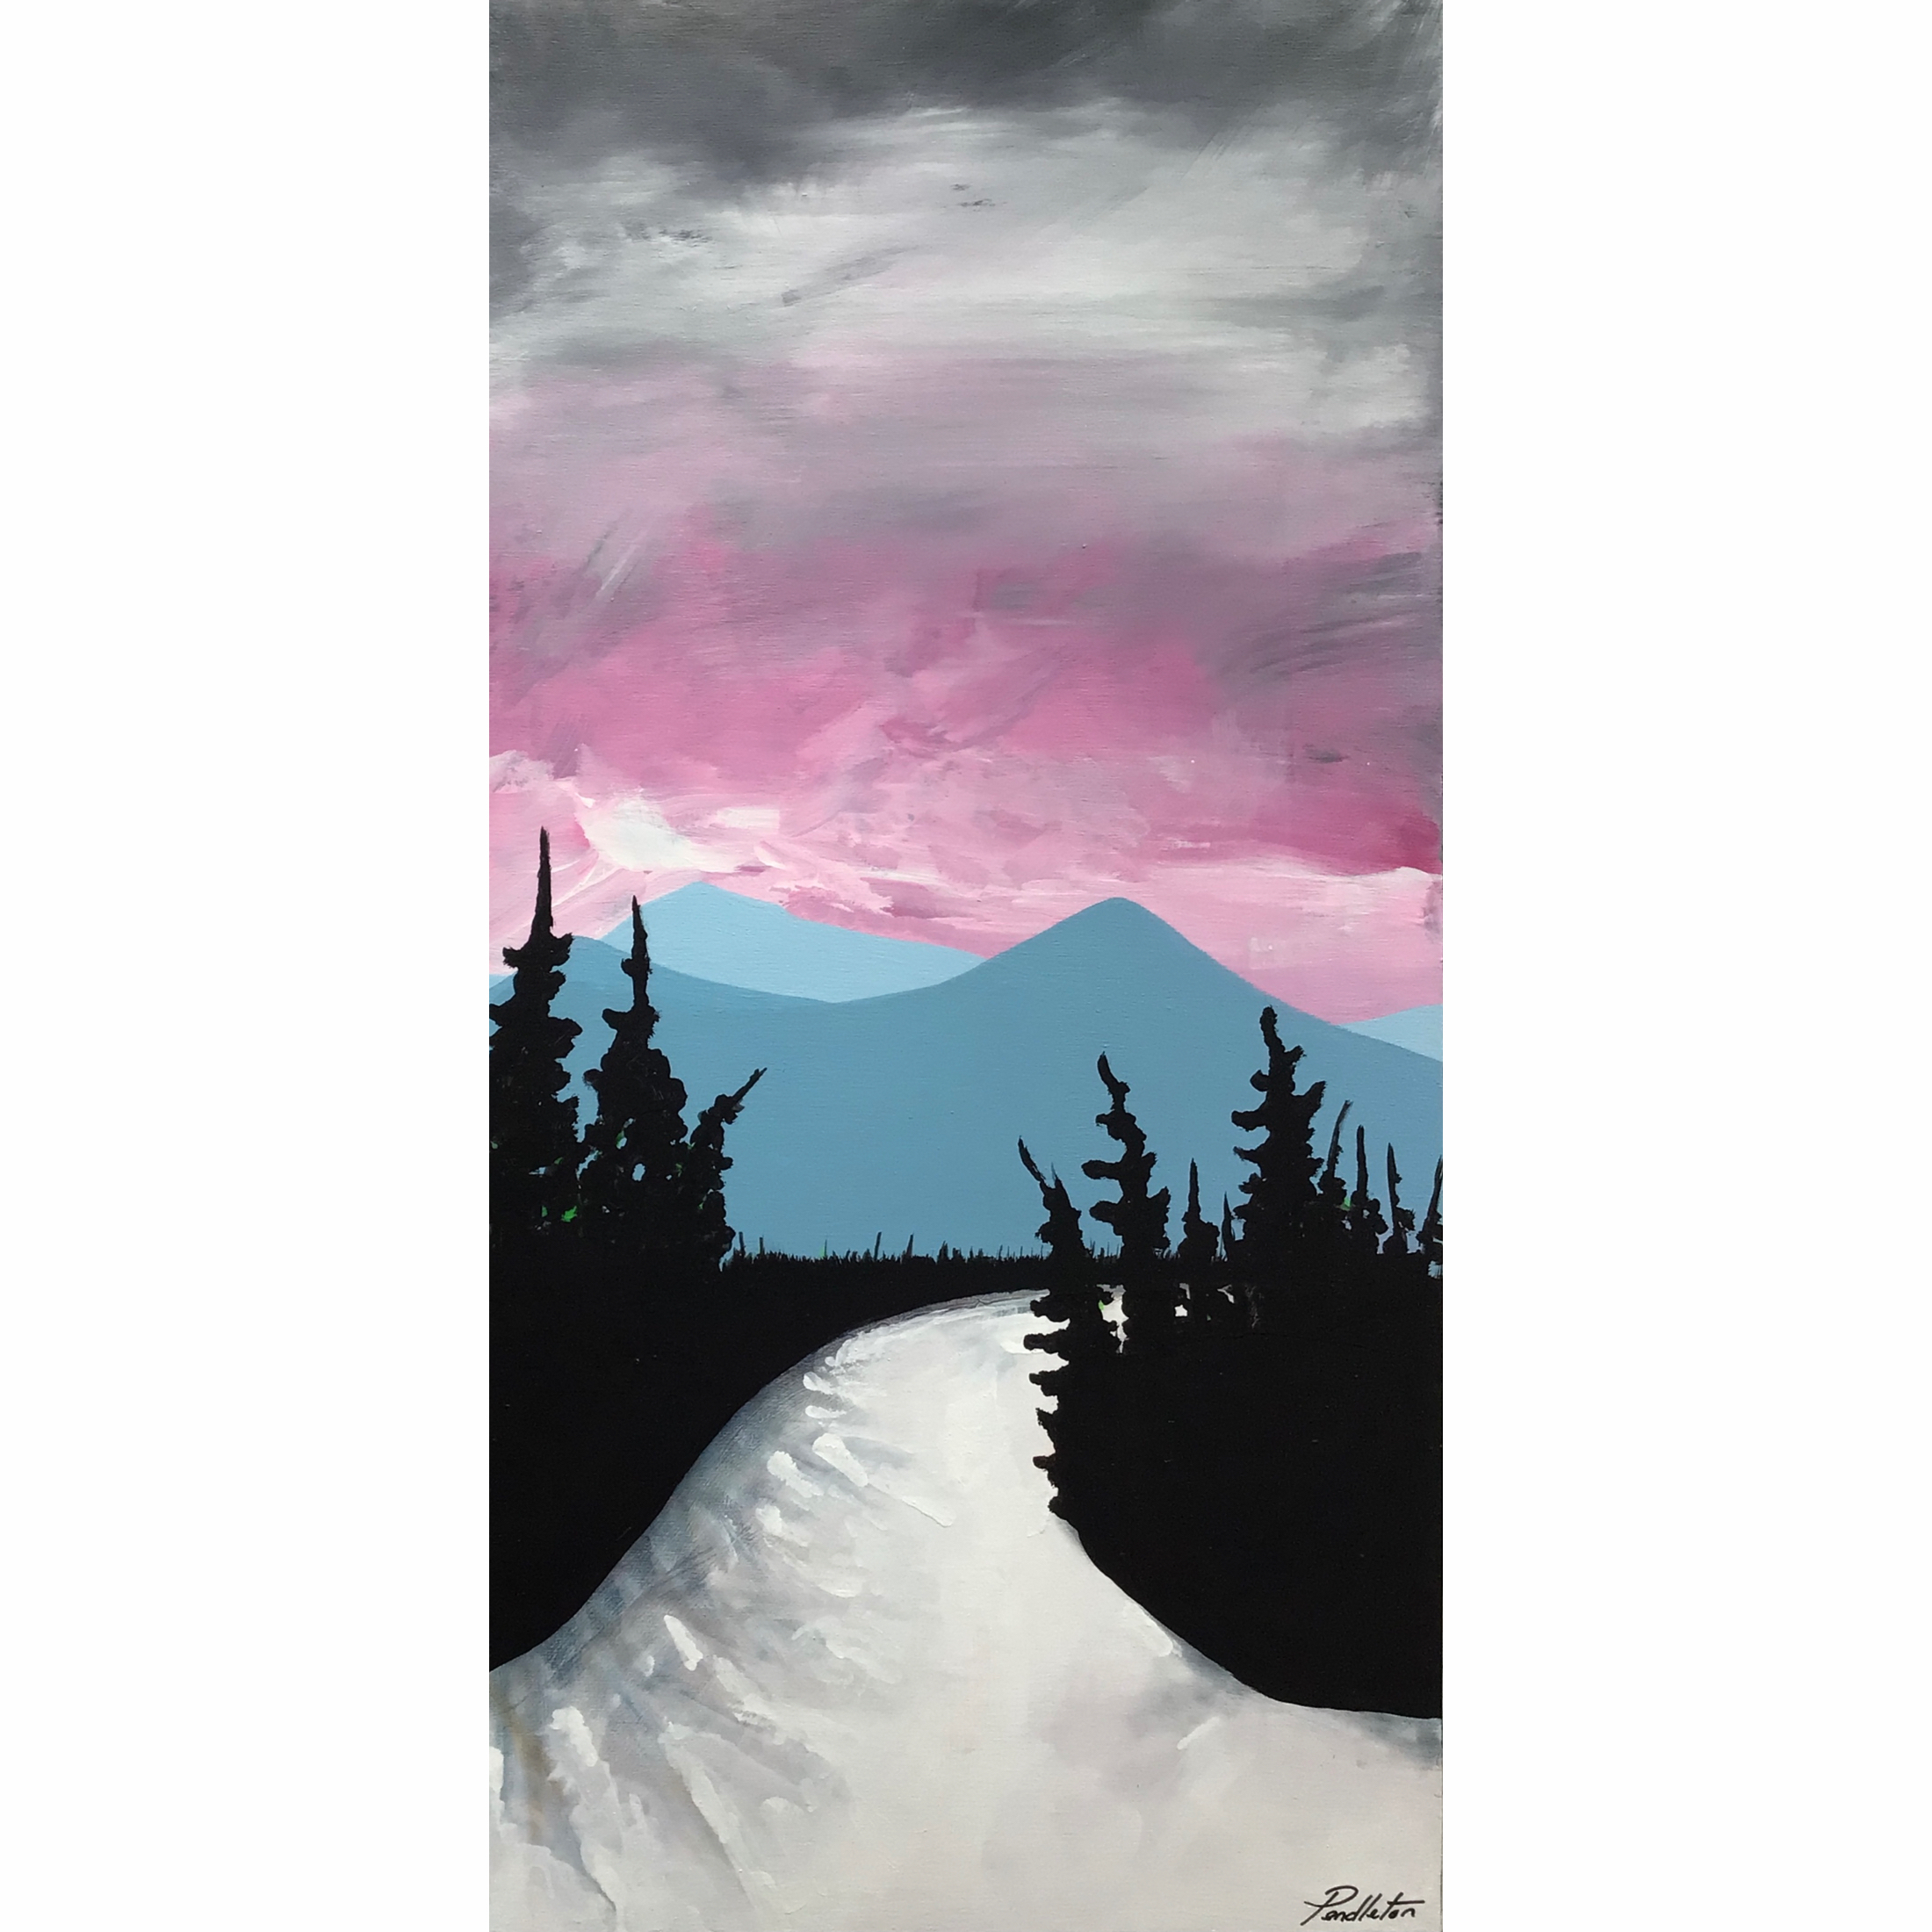 Free Ride, mixed media landscape painting by Cody Pendleton | Effusion Art Gallery + Cast Glass Studio, Invermere BC